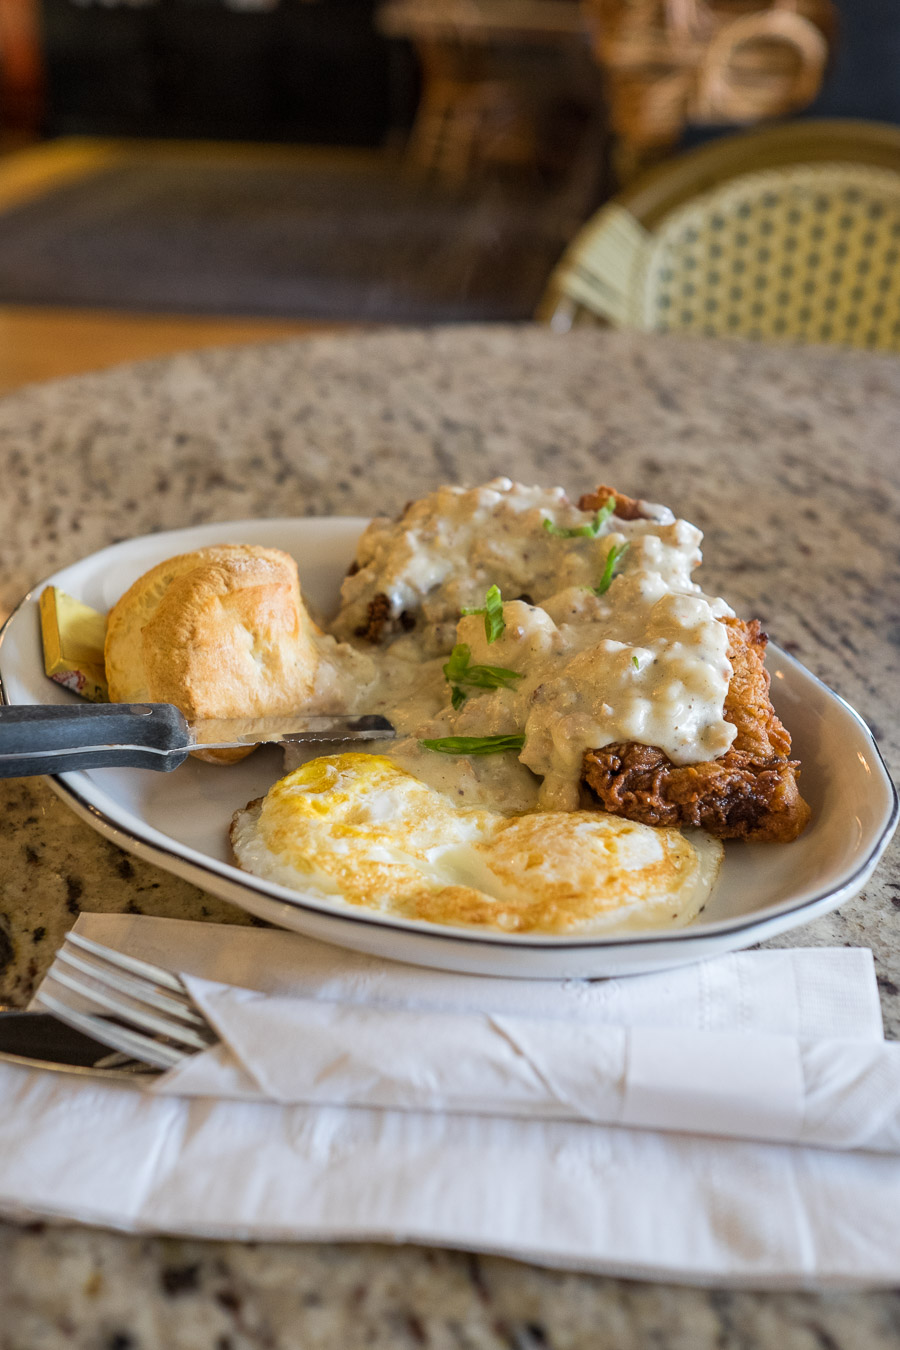 Chicken fried steak with country gravy, two eggs over easy and biscuits